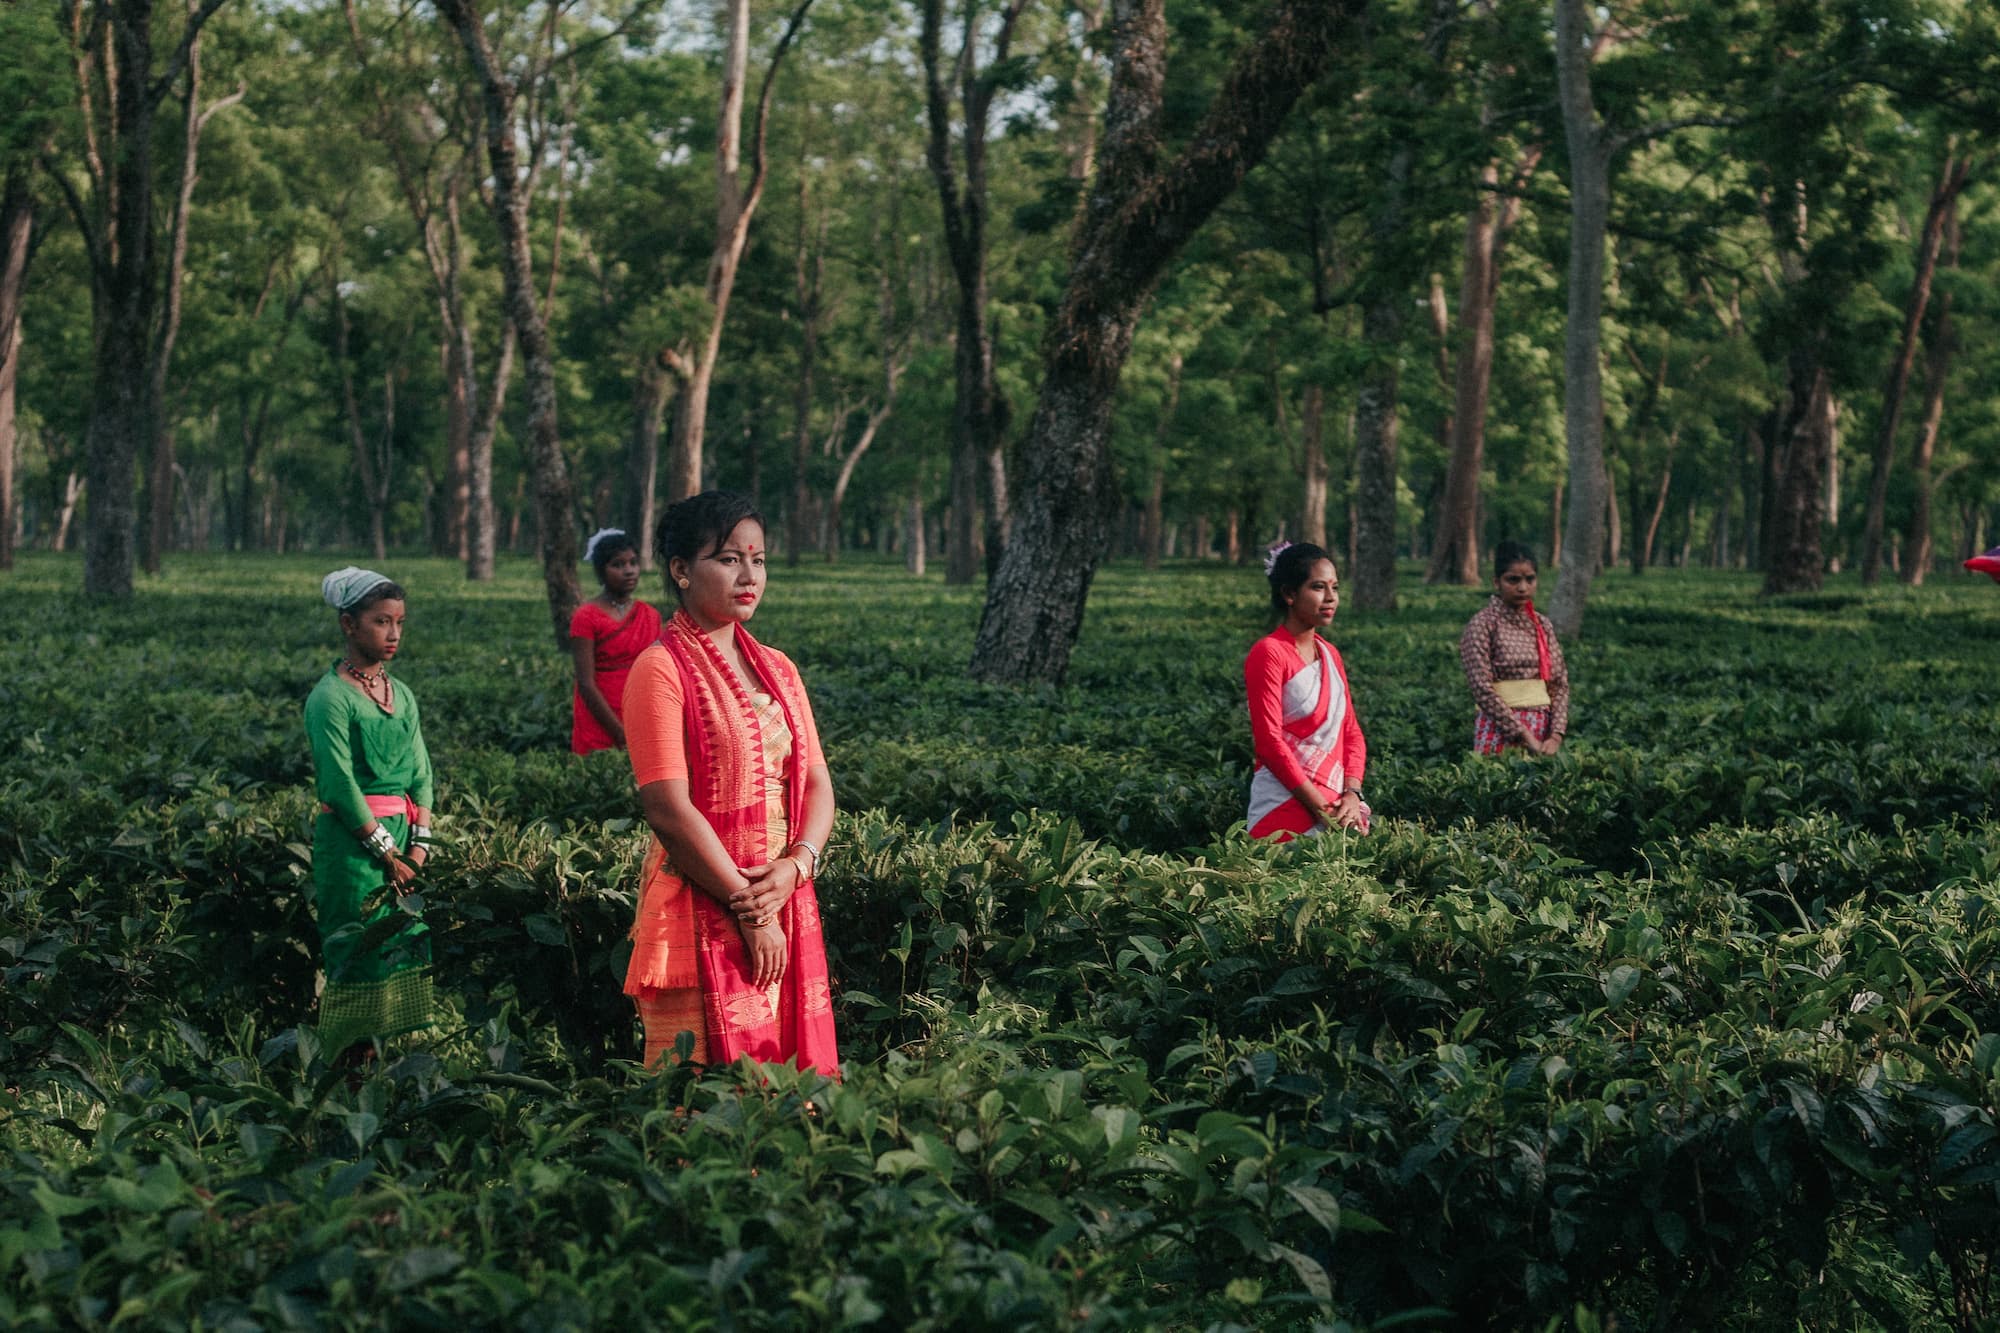 The villagers in Assam wear brightly colored saris